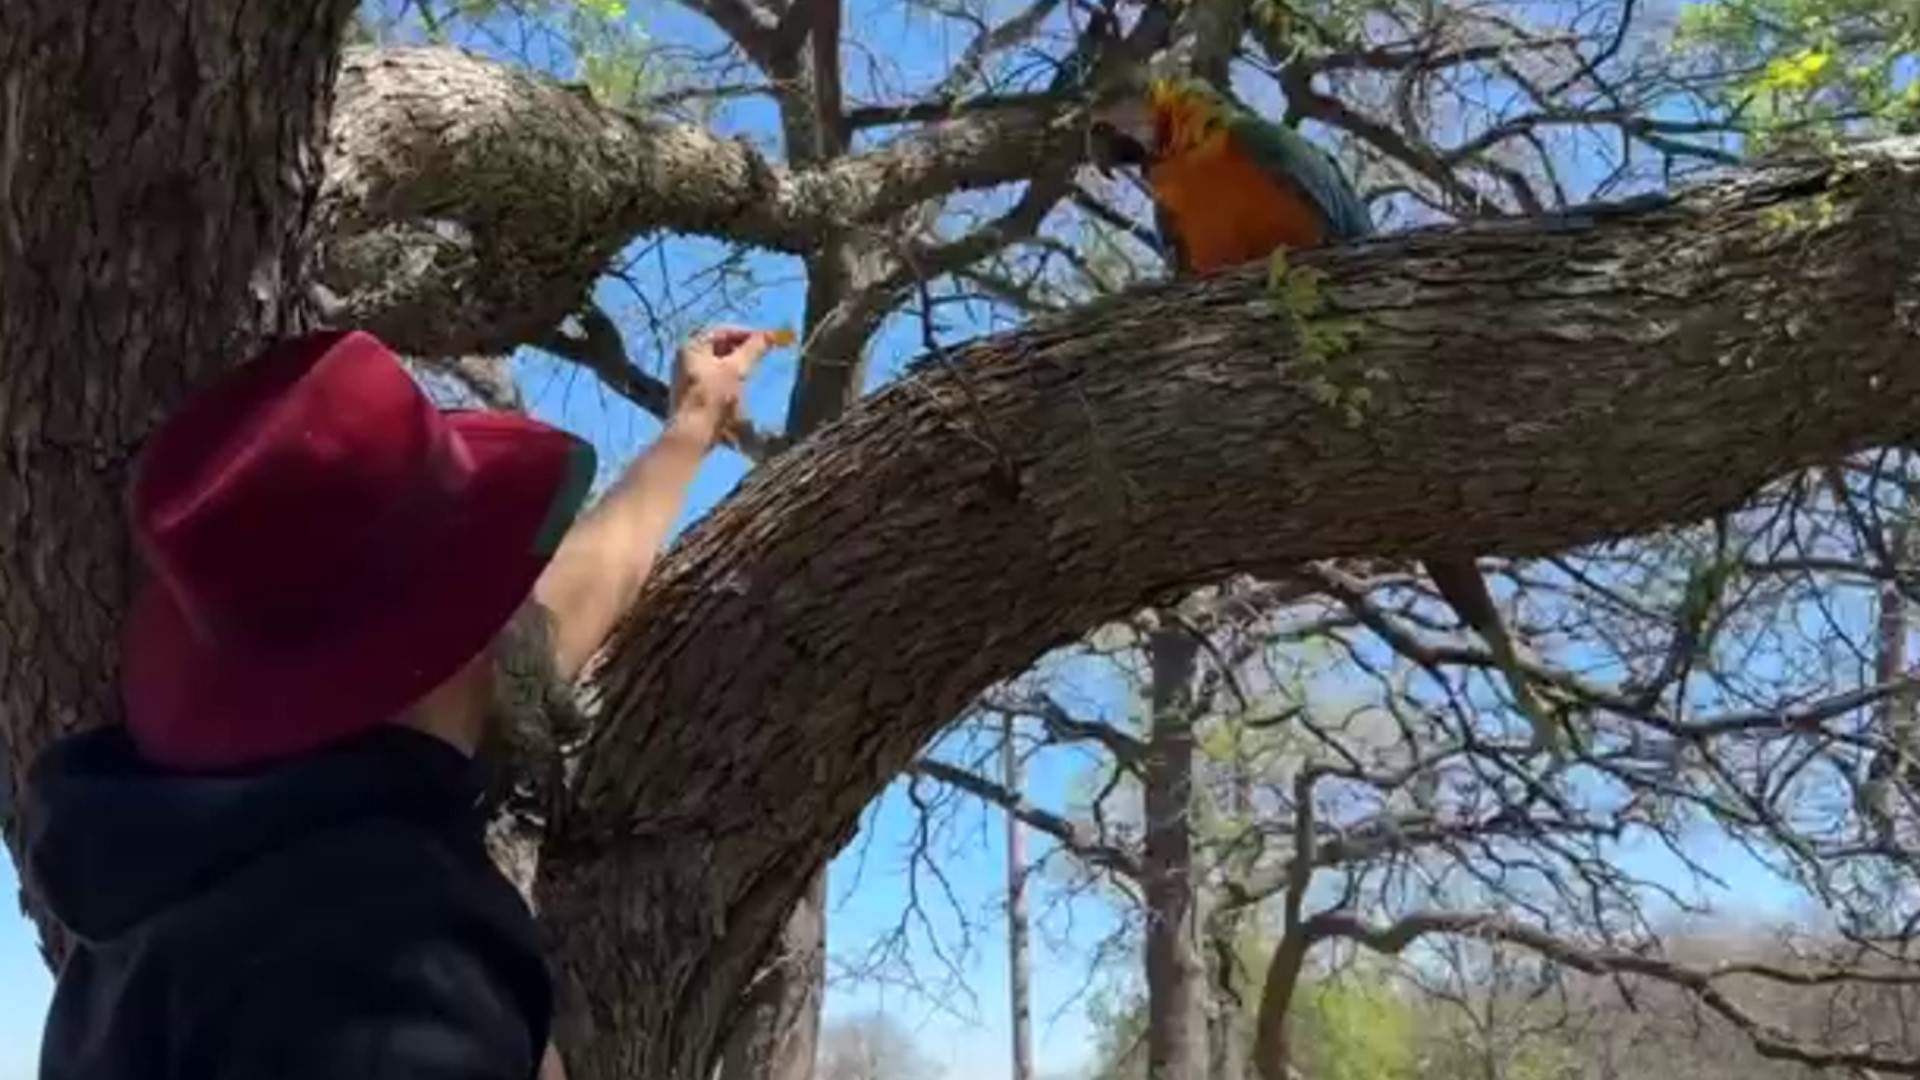 A beloved pet parrot, stuck high up in a tree near Lake Lewisville, Texas for three days has finally been reunited with his family.